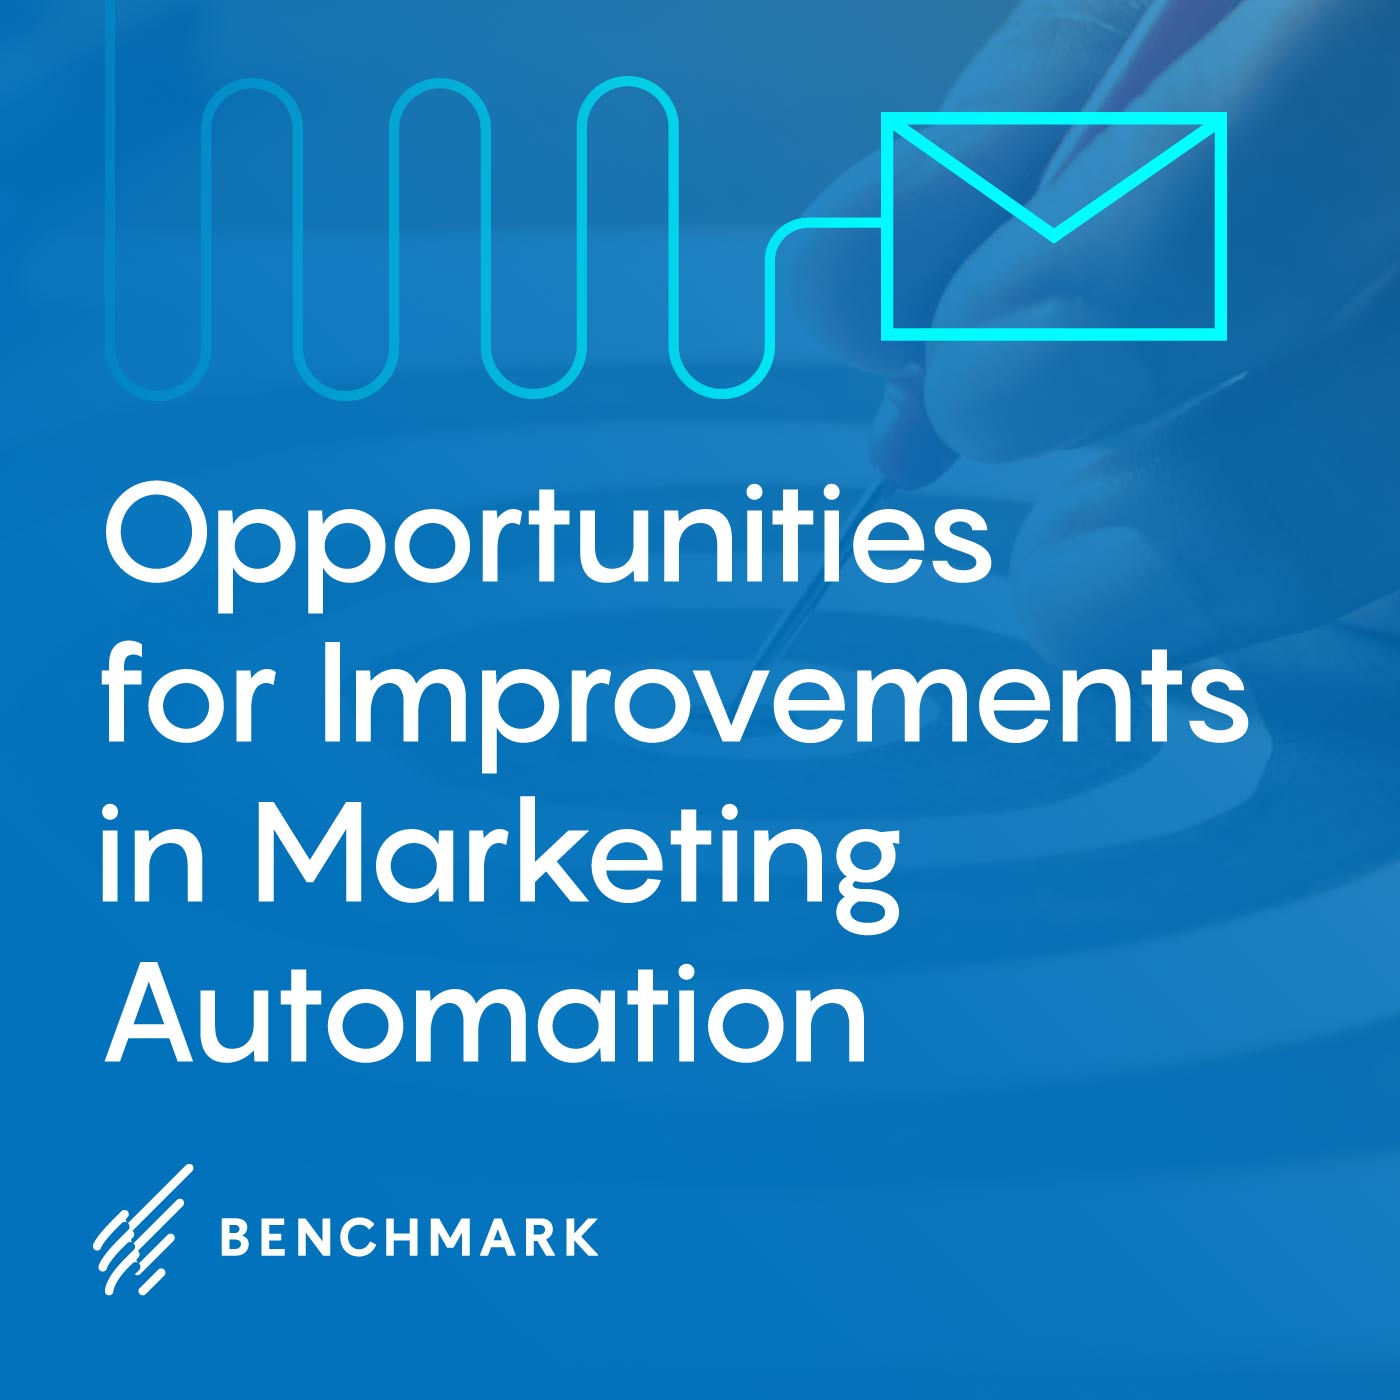 Opportunities For Improvements in Marketing Automation